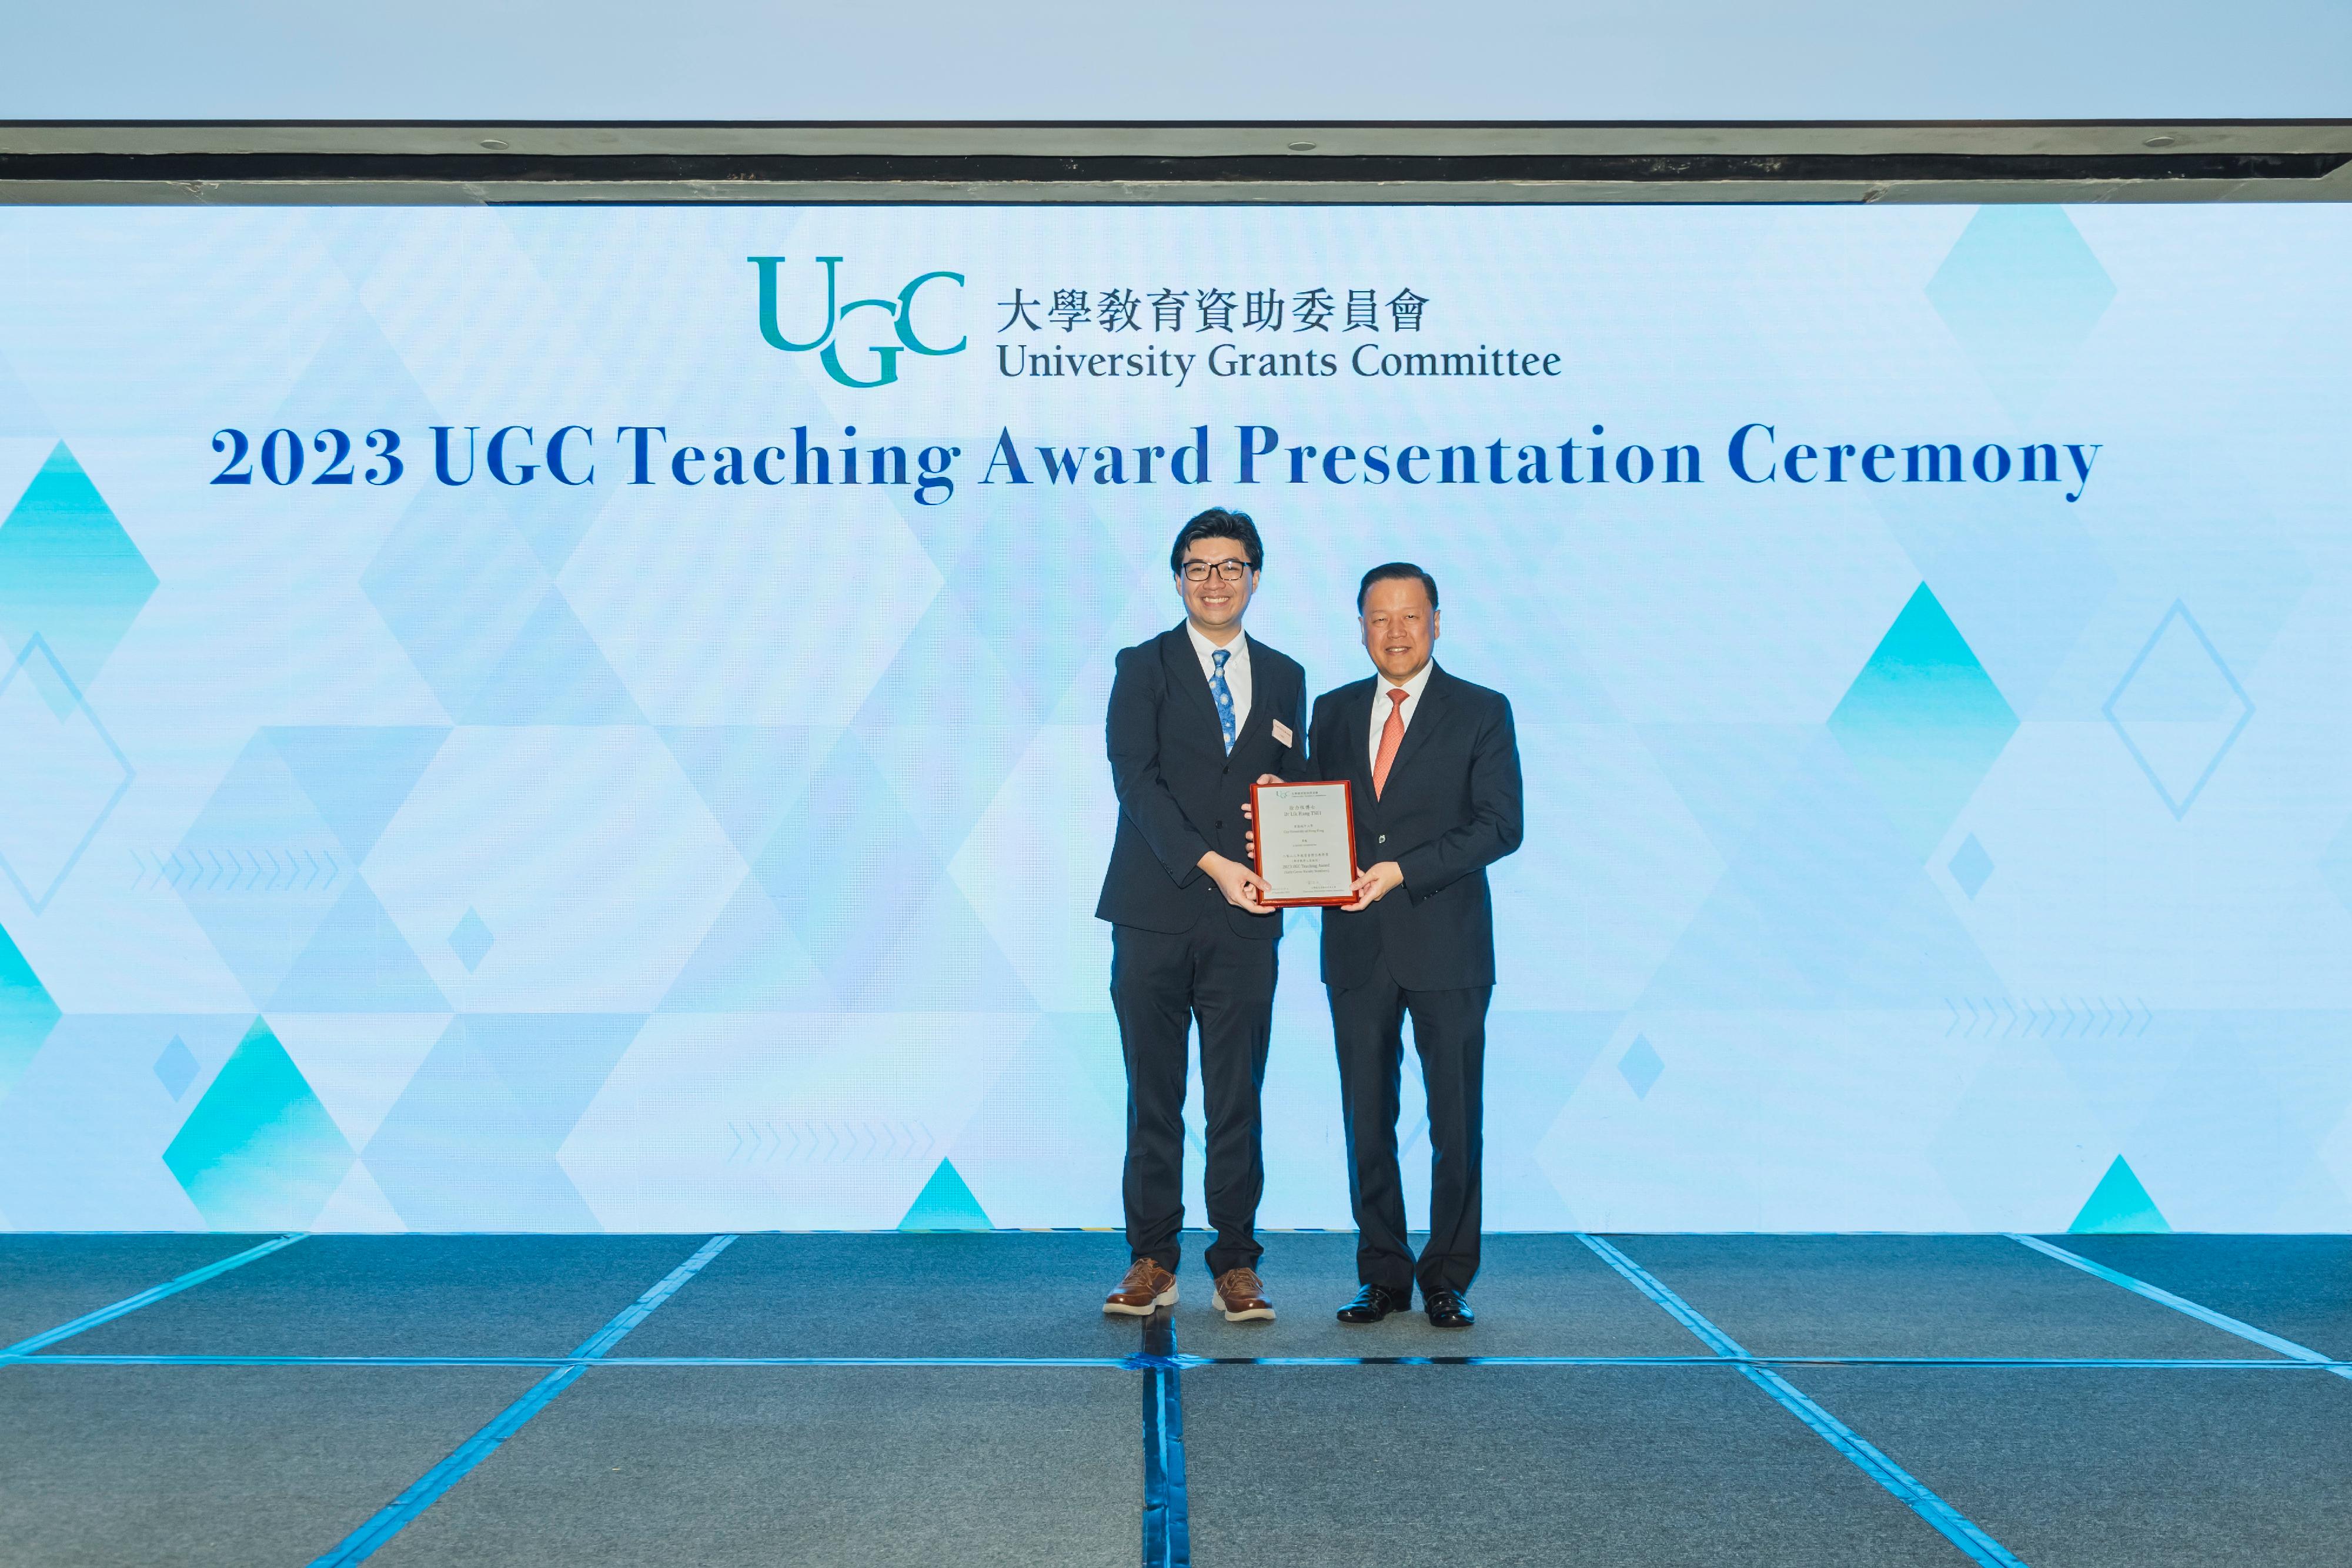 The Chairman of the University Grants Committee (UGC), Mr Tim Lui (right), today (September 27) presents the 2023 UGC Teaching Award for Early Career Faculty Members to Professor Tsui Lik-hang (left) of the City University of Hong Kong.